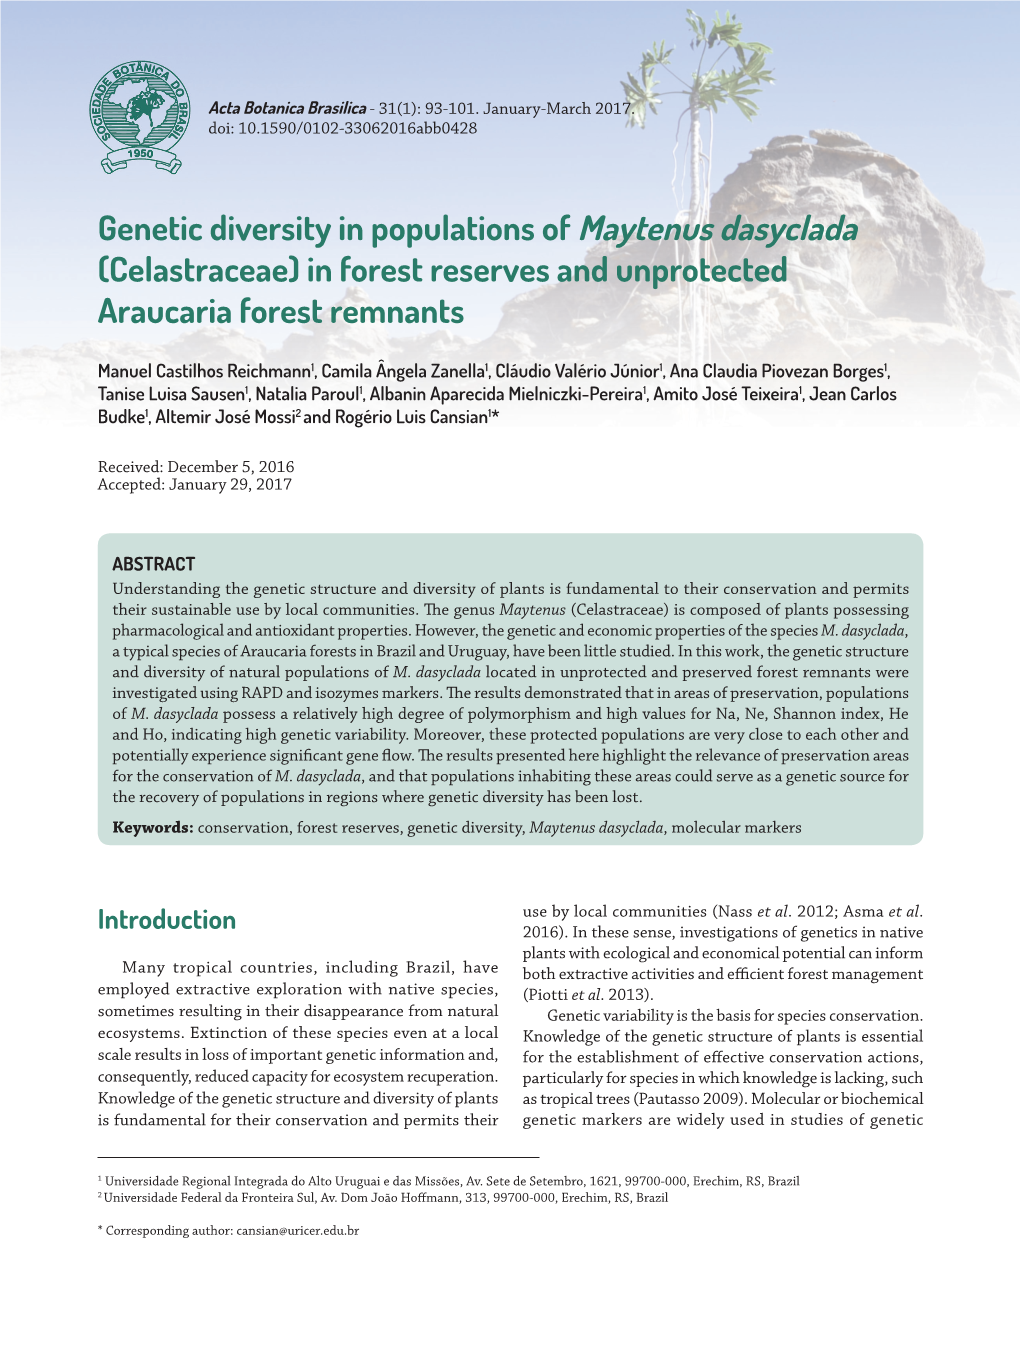 Genetic Diversity in Populations of Maytenus Dasyclada (Celastraceae) in Forest Reserves and Unprotected Araucaria Forest Remnants